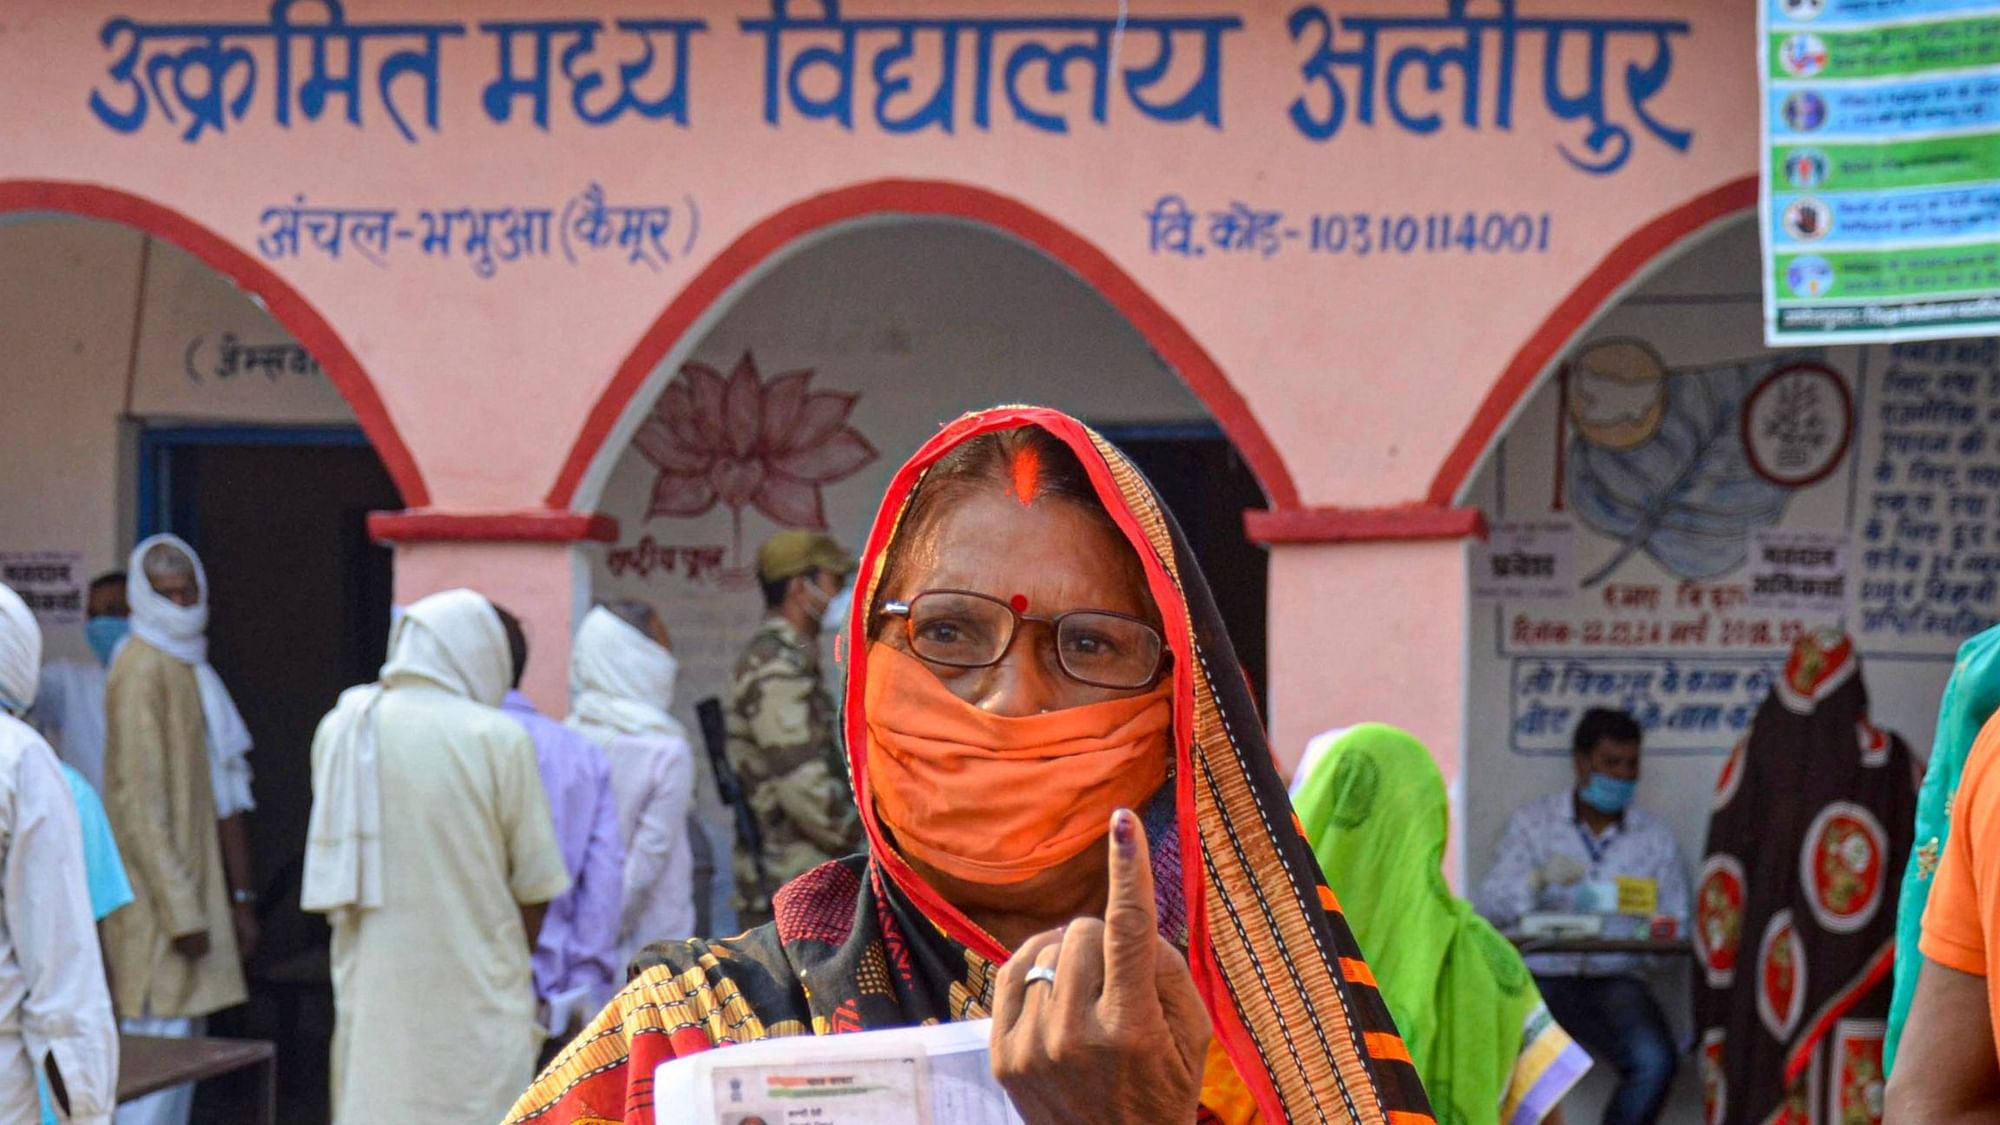 A voter shows her finger marked with indelible ink after casting her vote for the first phase of Bihar Assembly Election, amid the coronavirus pandemic, at Bhabua police station in Kaimur district, Wednesday, 28 October.